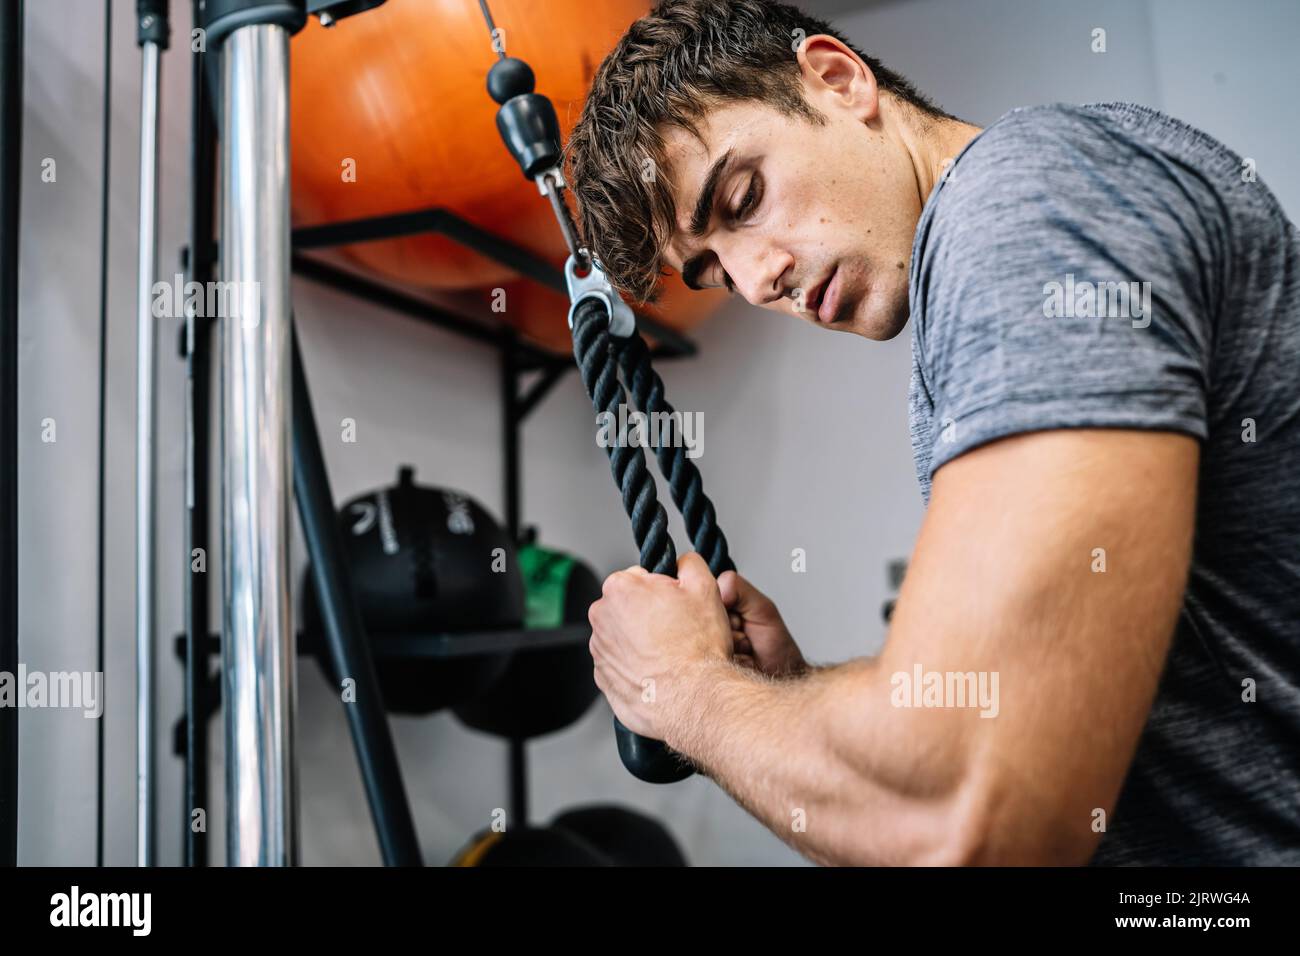 Low angle of strong male athlete with strong arm muscles looking at bicep and pulling rope of cable machine during fitness training in contemporary gy Stock Photo